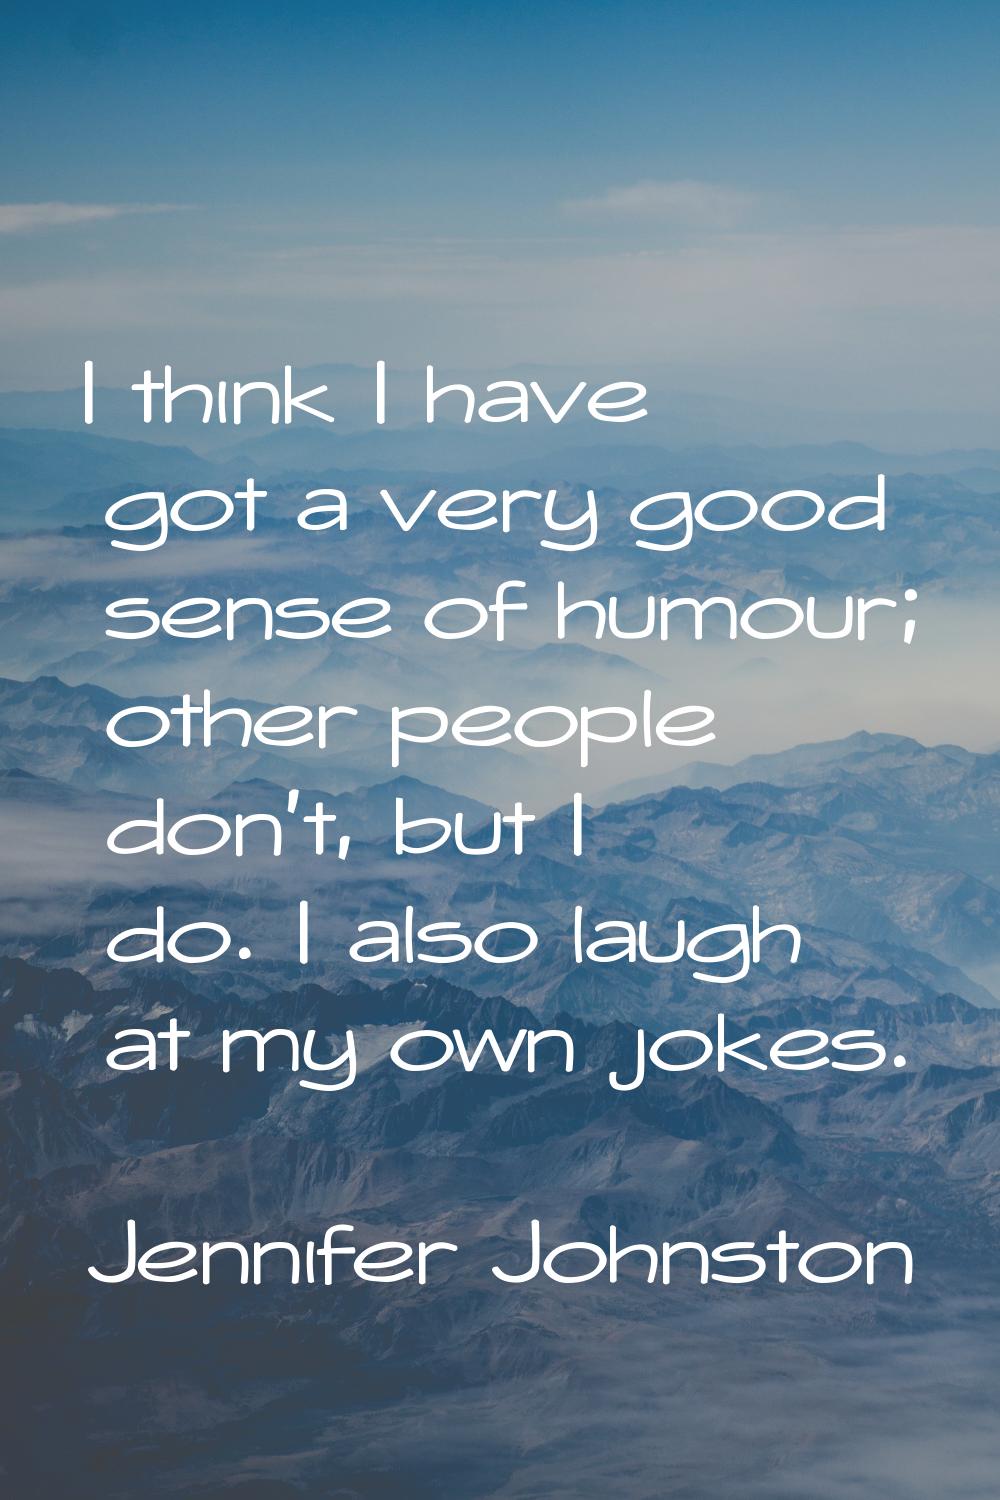 I think I have got a very good sense of humour; other people don't, but I do. I also laugh at my ow